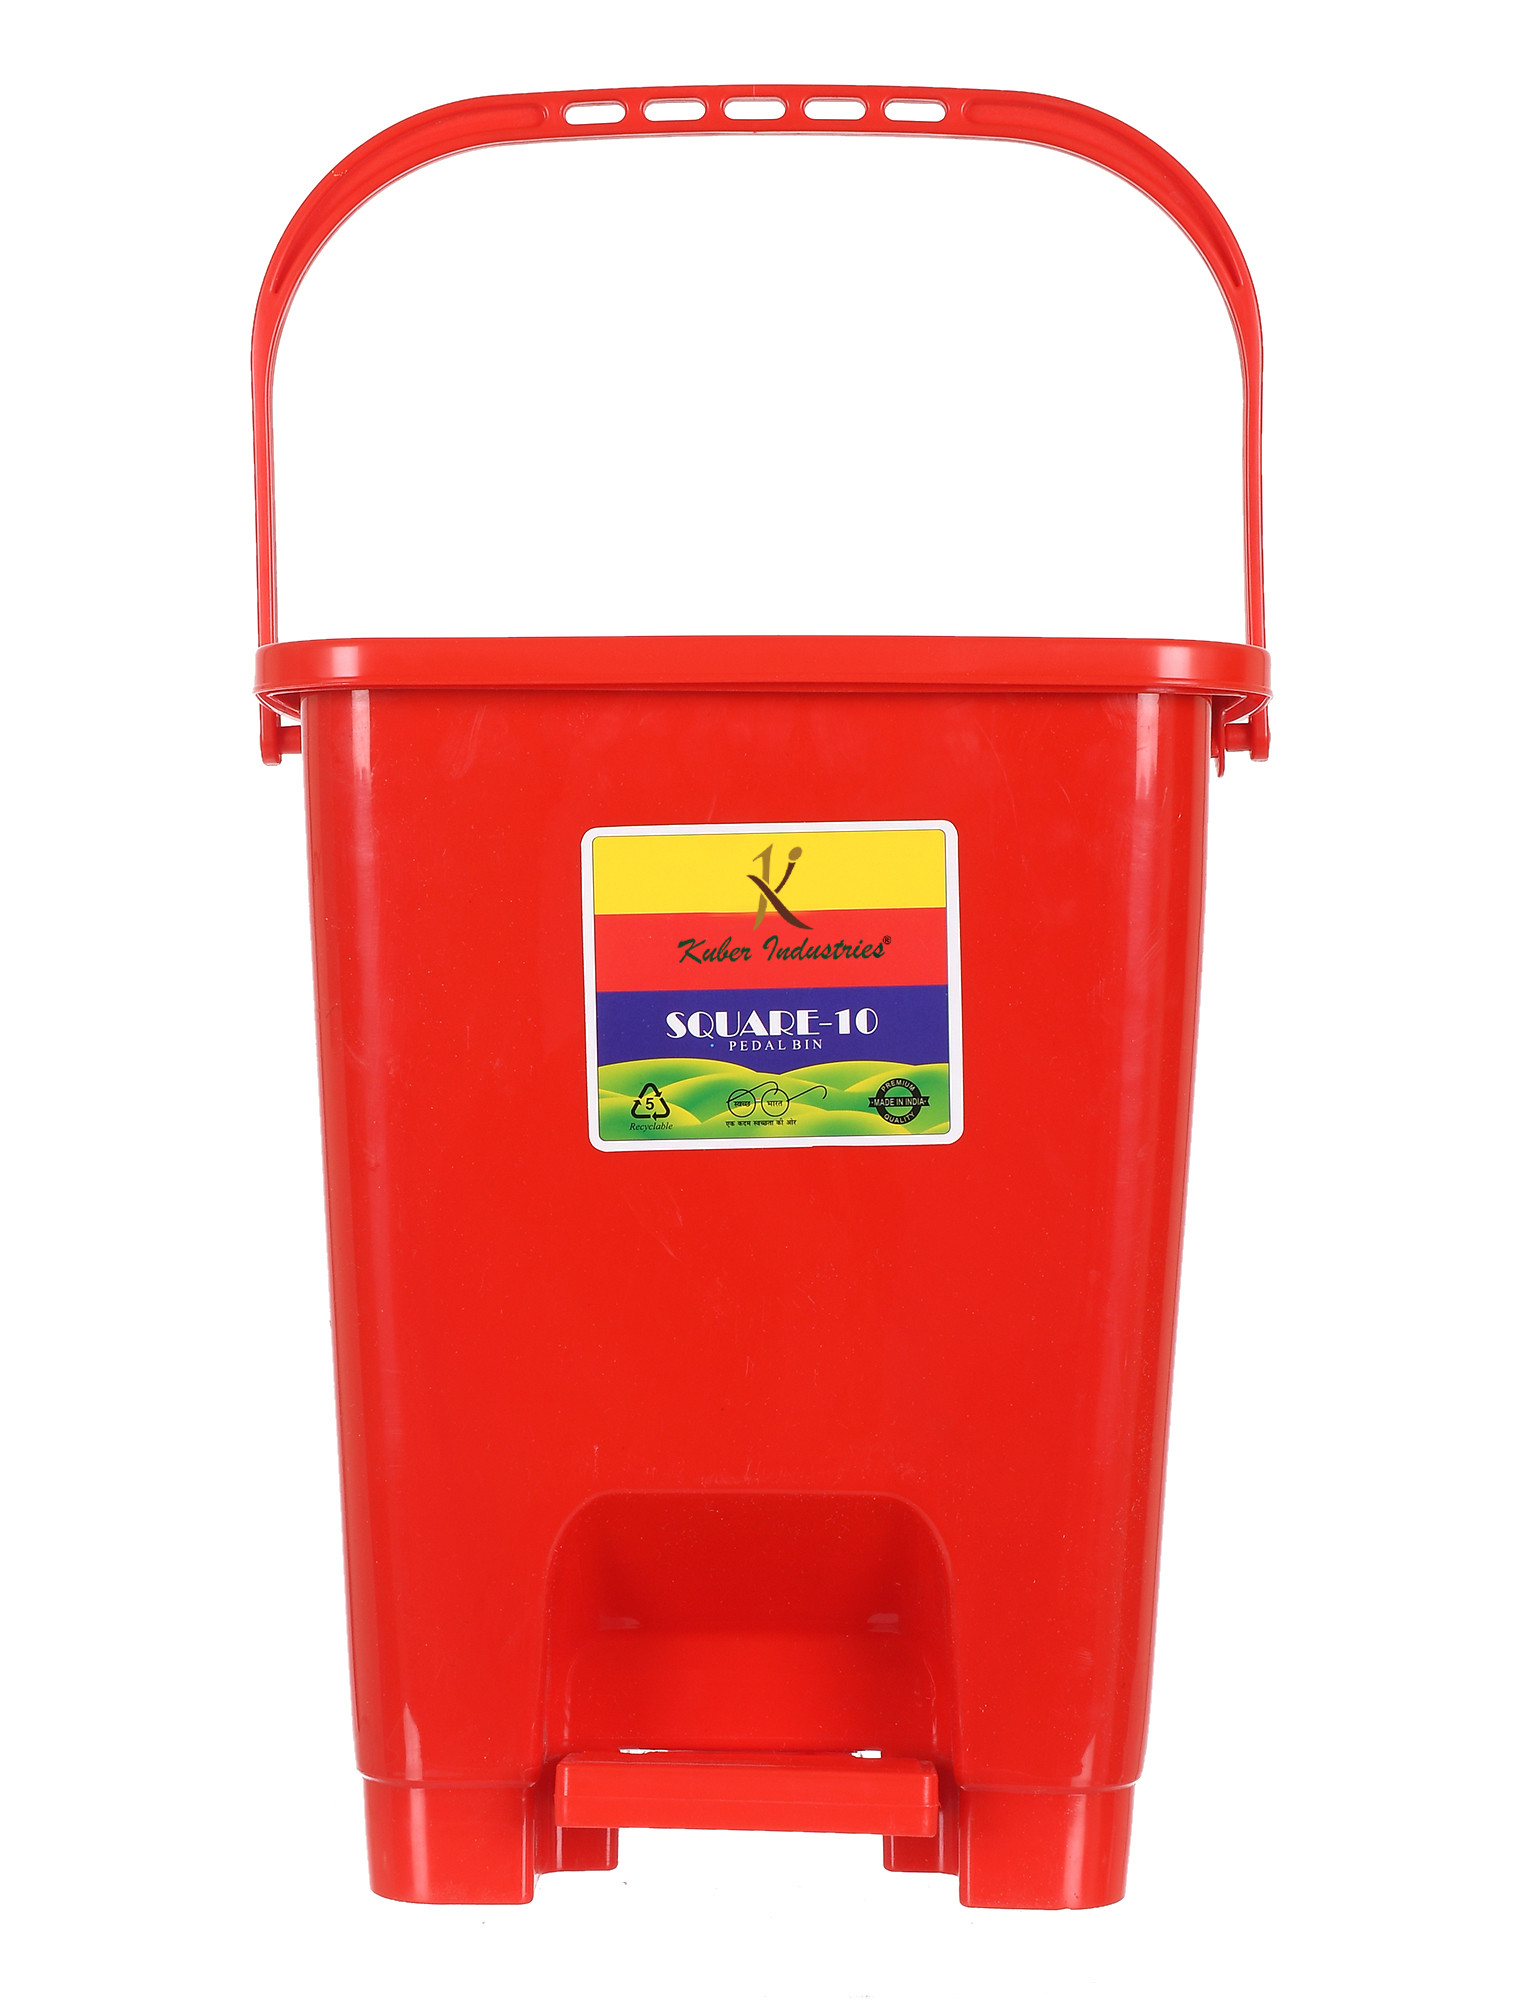 Kuber Industries Premium Plastic Pedal Dustbin 10 Ltr (Black & Red & Yellow)-Pack of 3